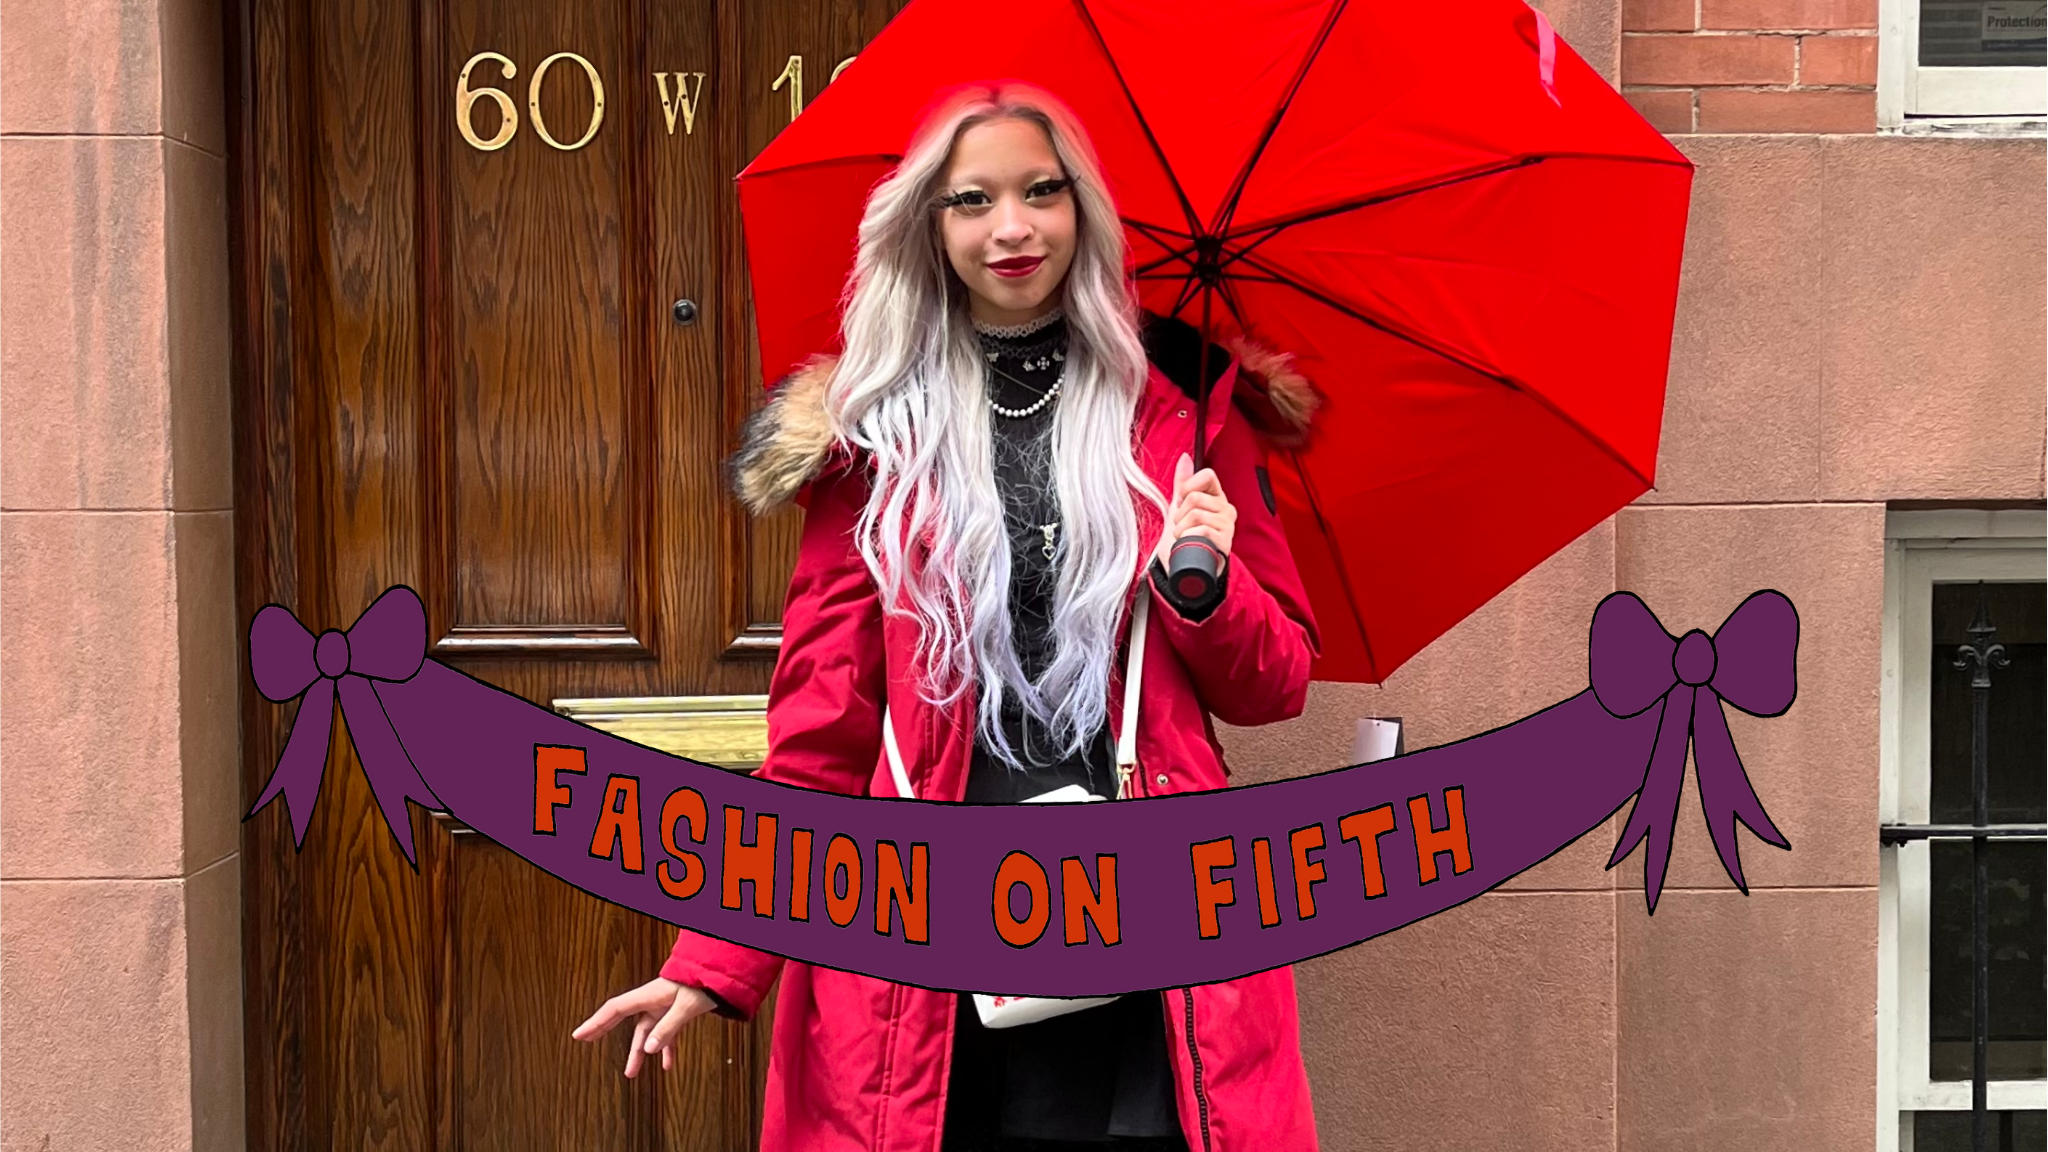 Second-year philosophy student wears a red coat, and has silver hair while holding a red umbrella and standing in front of a brownstone on fifth avenue.